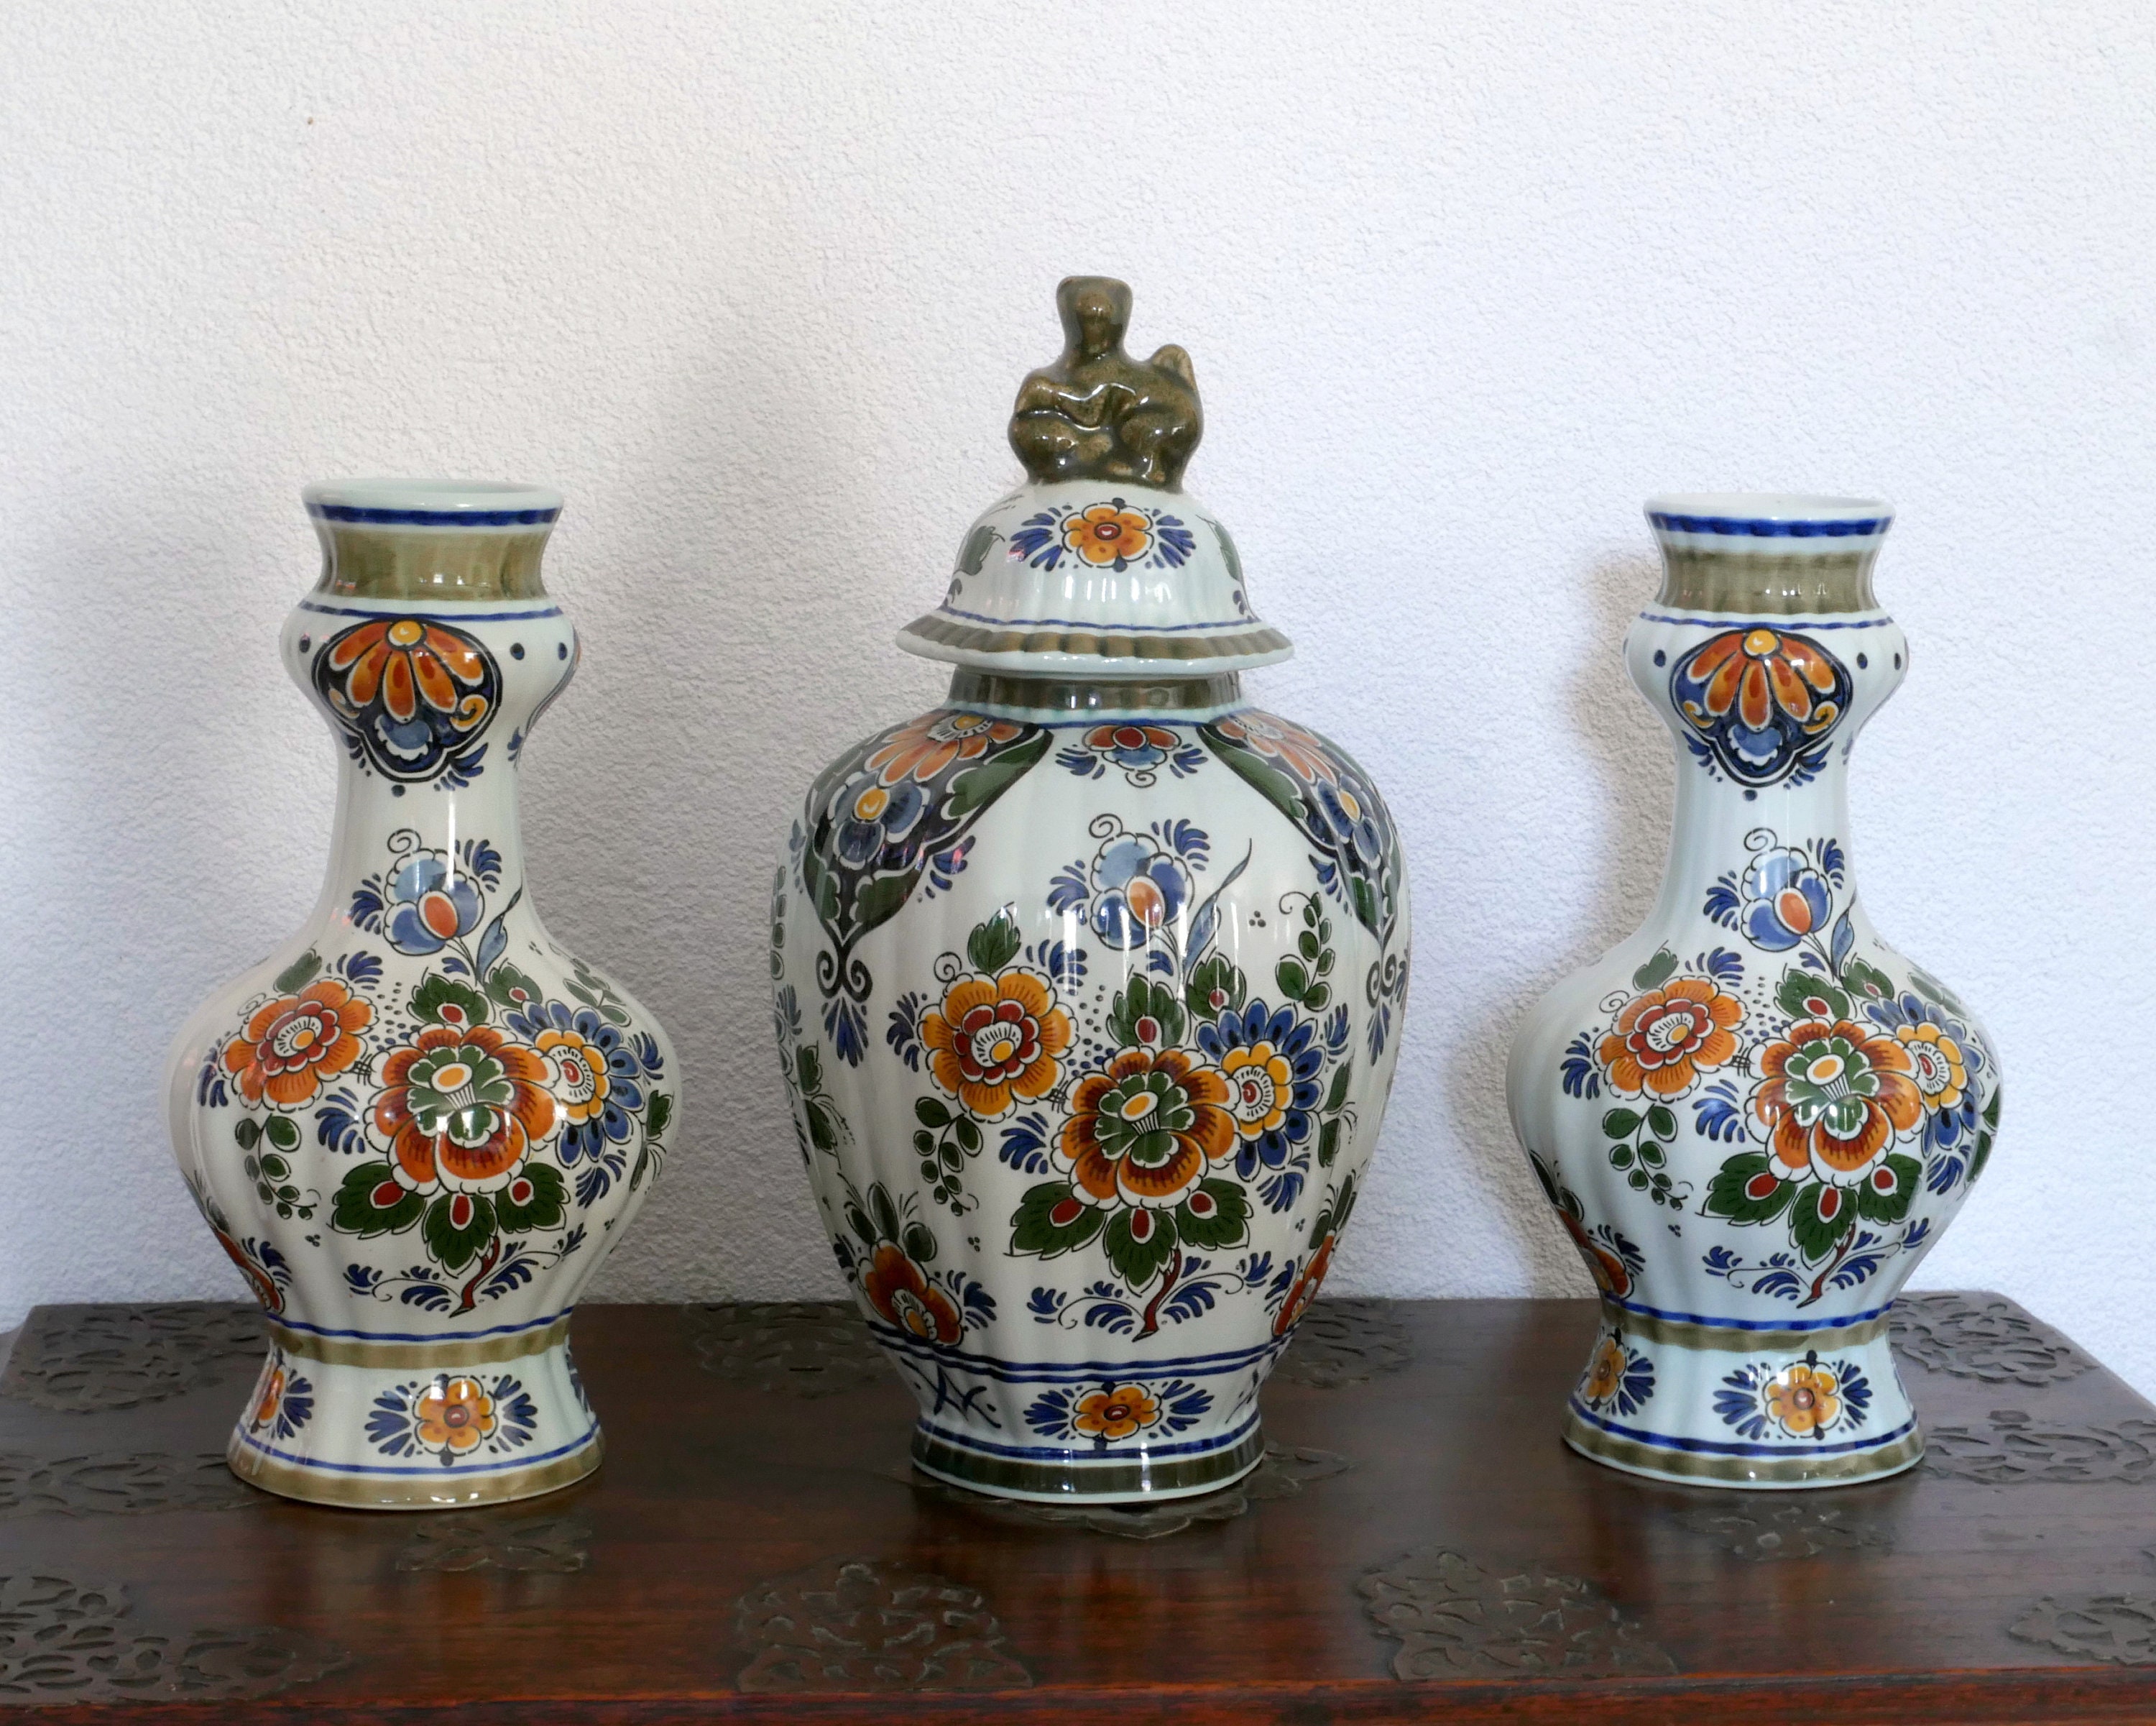 Pair of Delft Polychrome Lump Vases H22cm, Hand Painted Vintage Delftware  Dutch Heritage Pottery From Holland, Chinoiserie Flower Decor 